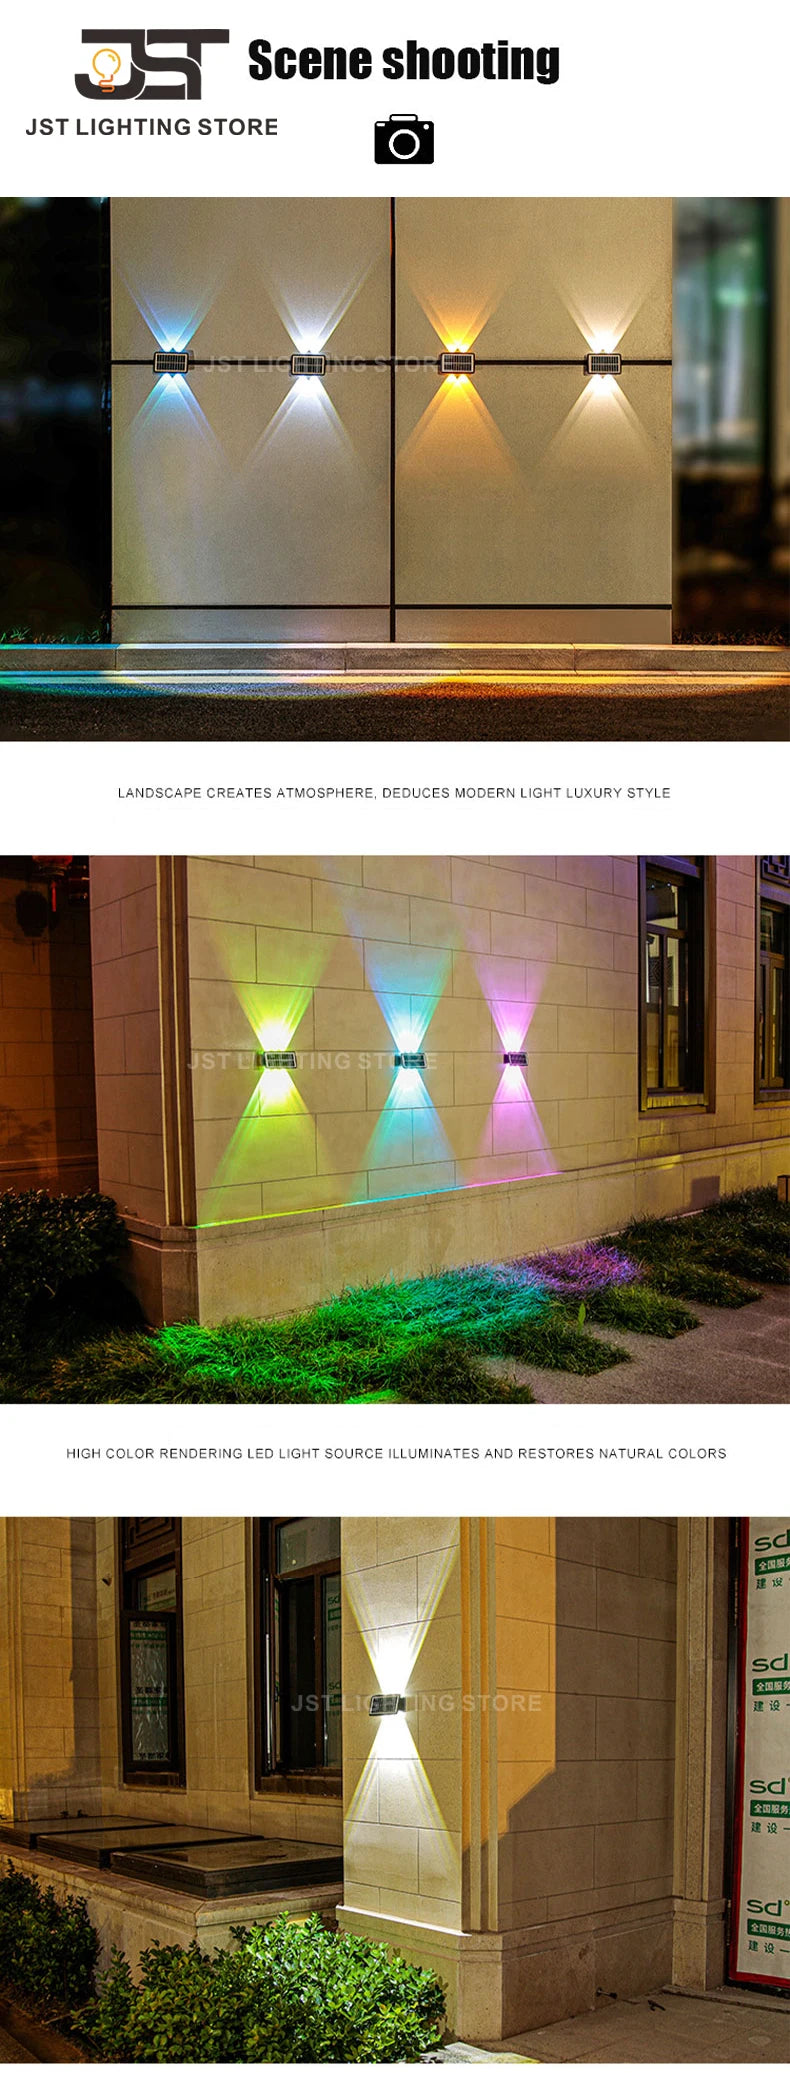 Solar LED Wall Light, Modern luxury store ambiance achieved through high-color-rendering LED lighting, showcasing vibrant colors.